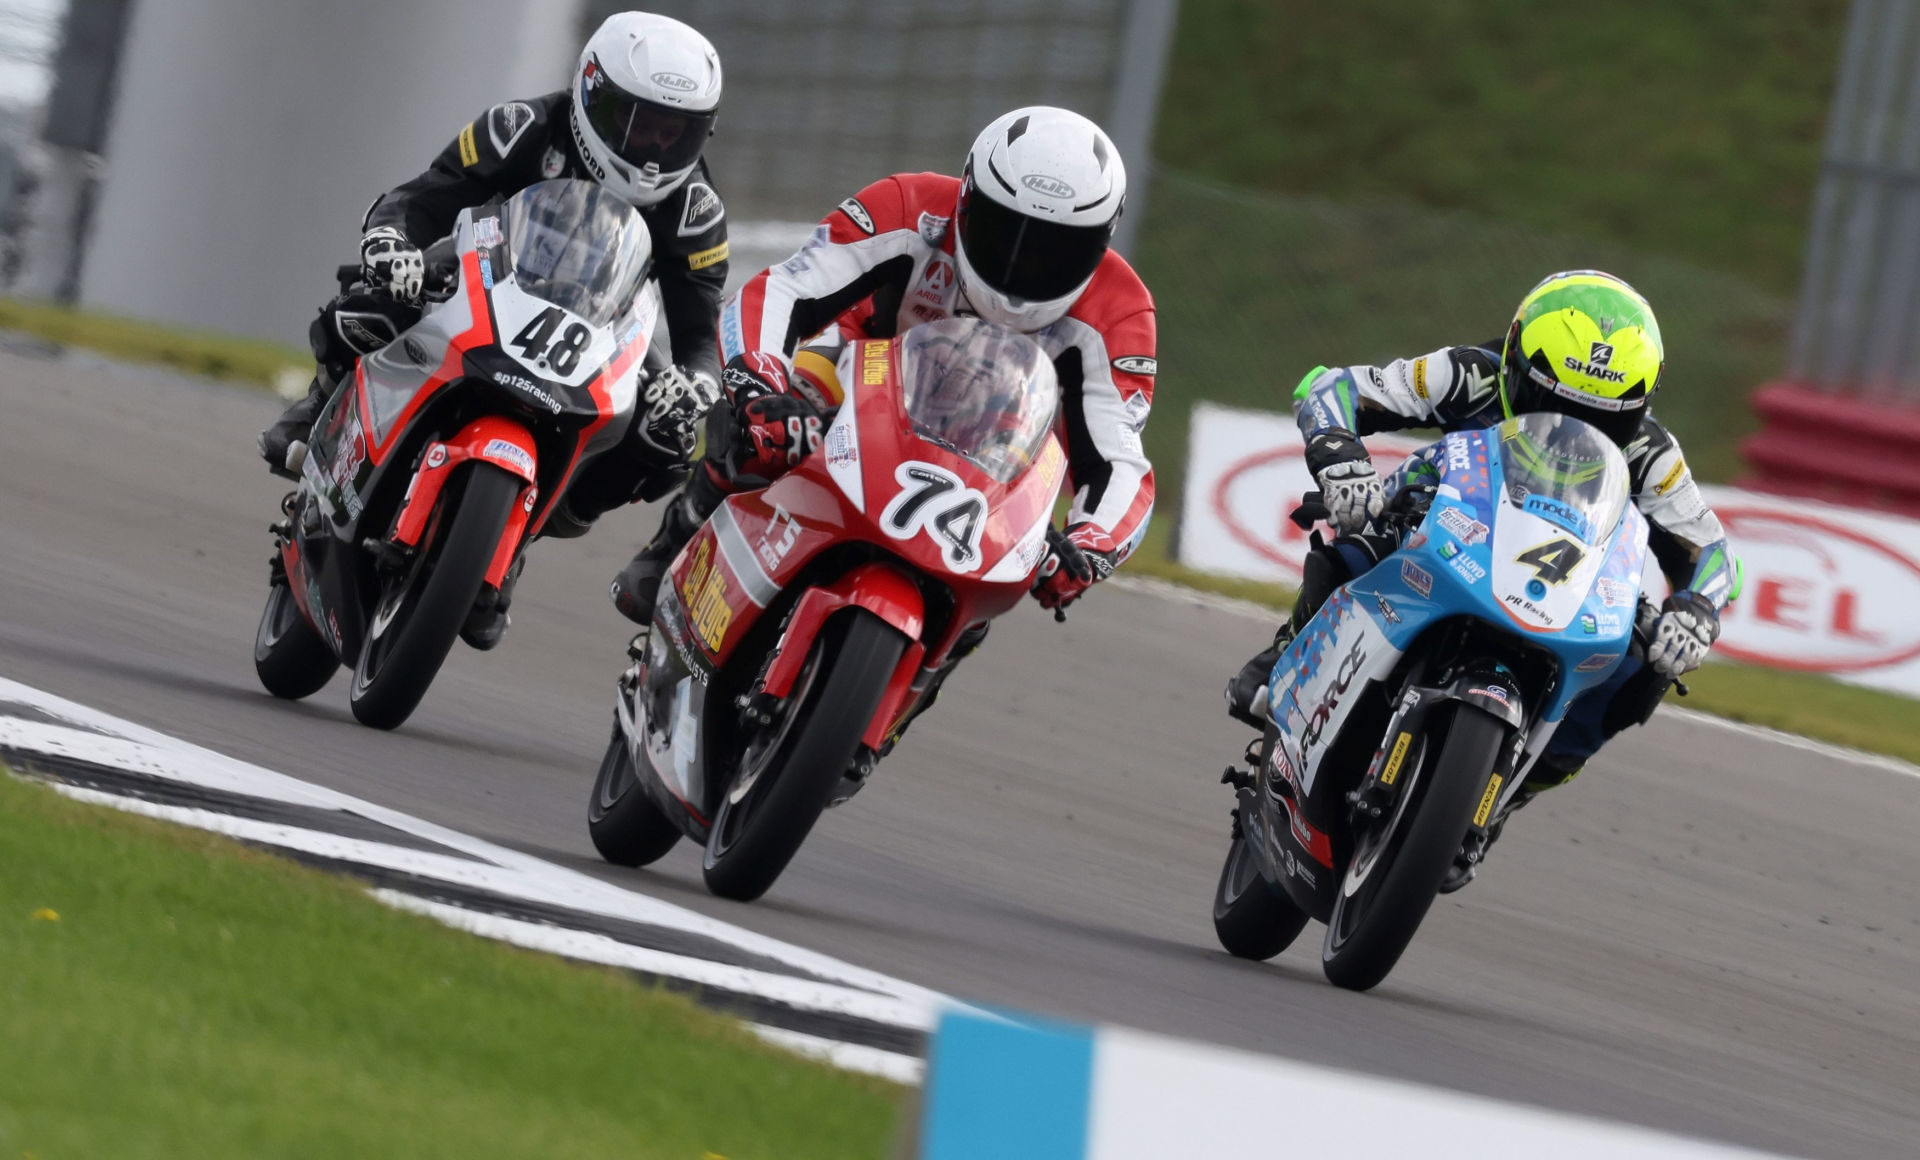 Ollie Walker (48), Carter Brown (74), and Sullivan Mounsey (4) battle for the lead at Silverstone. Photo courtesy Dorna.